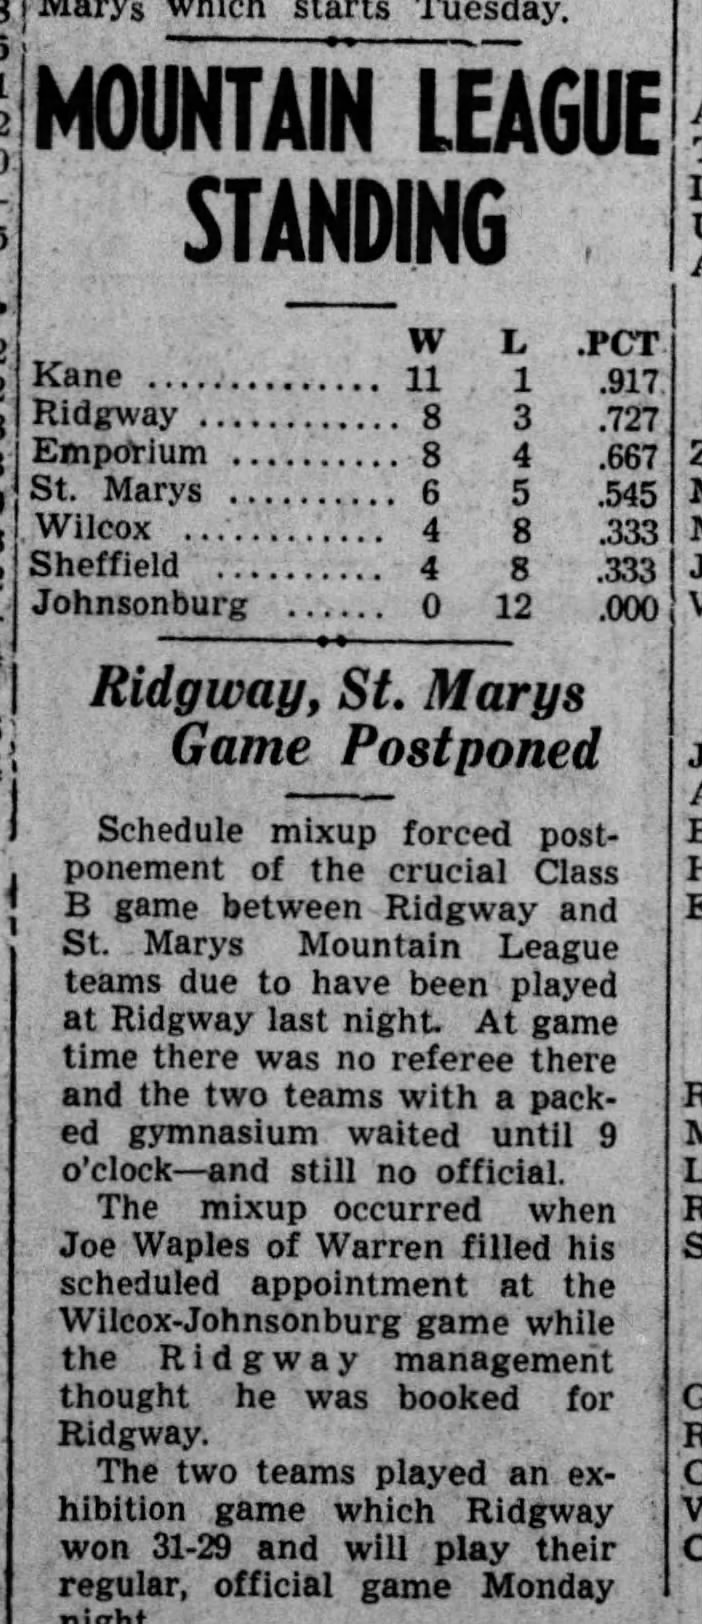 1947 almost Final AML Standings, except Ridgway & St. Marys